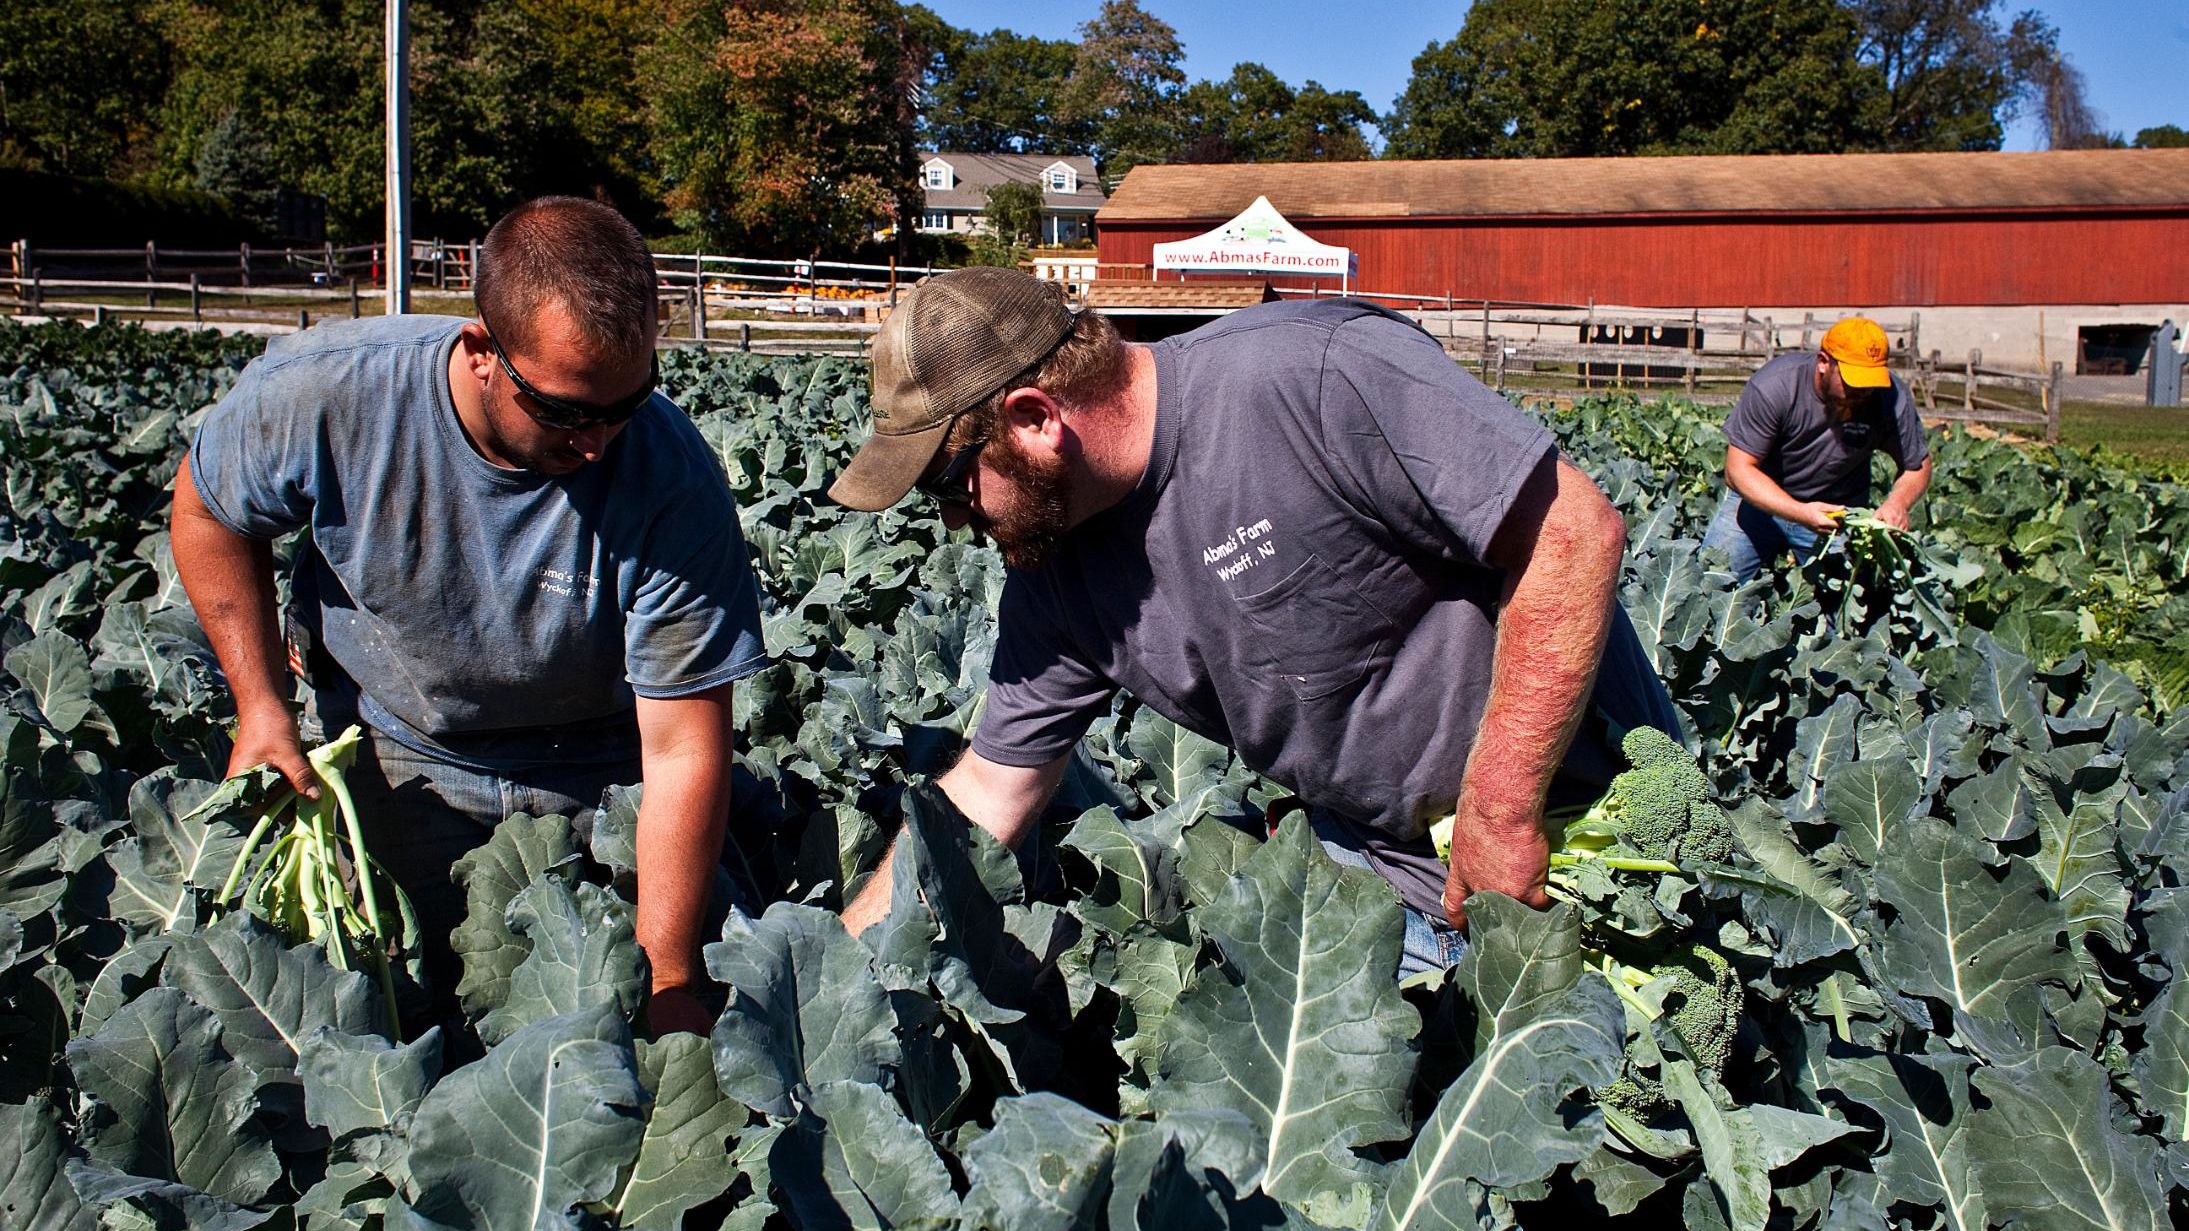 Darren Ehlers, (left) Jimmy Abma (center) and Josh Abma (right) cut heads of broccoli at Abma's Farm on Lawlins Road in Wyckoff, N.J., on Friday, October 7, 2016.